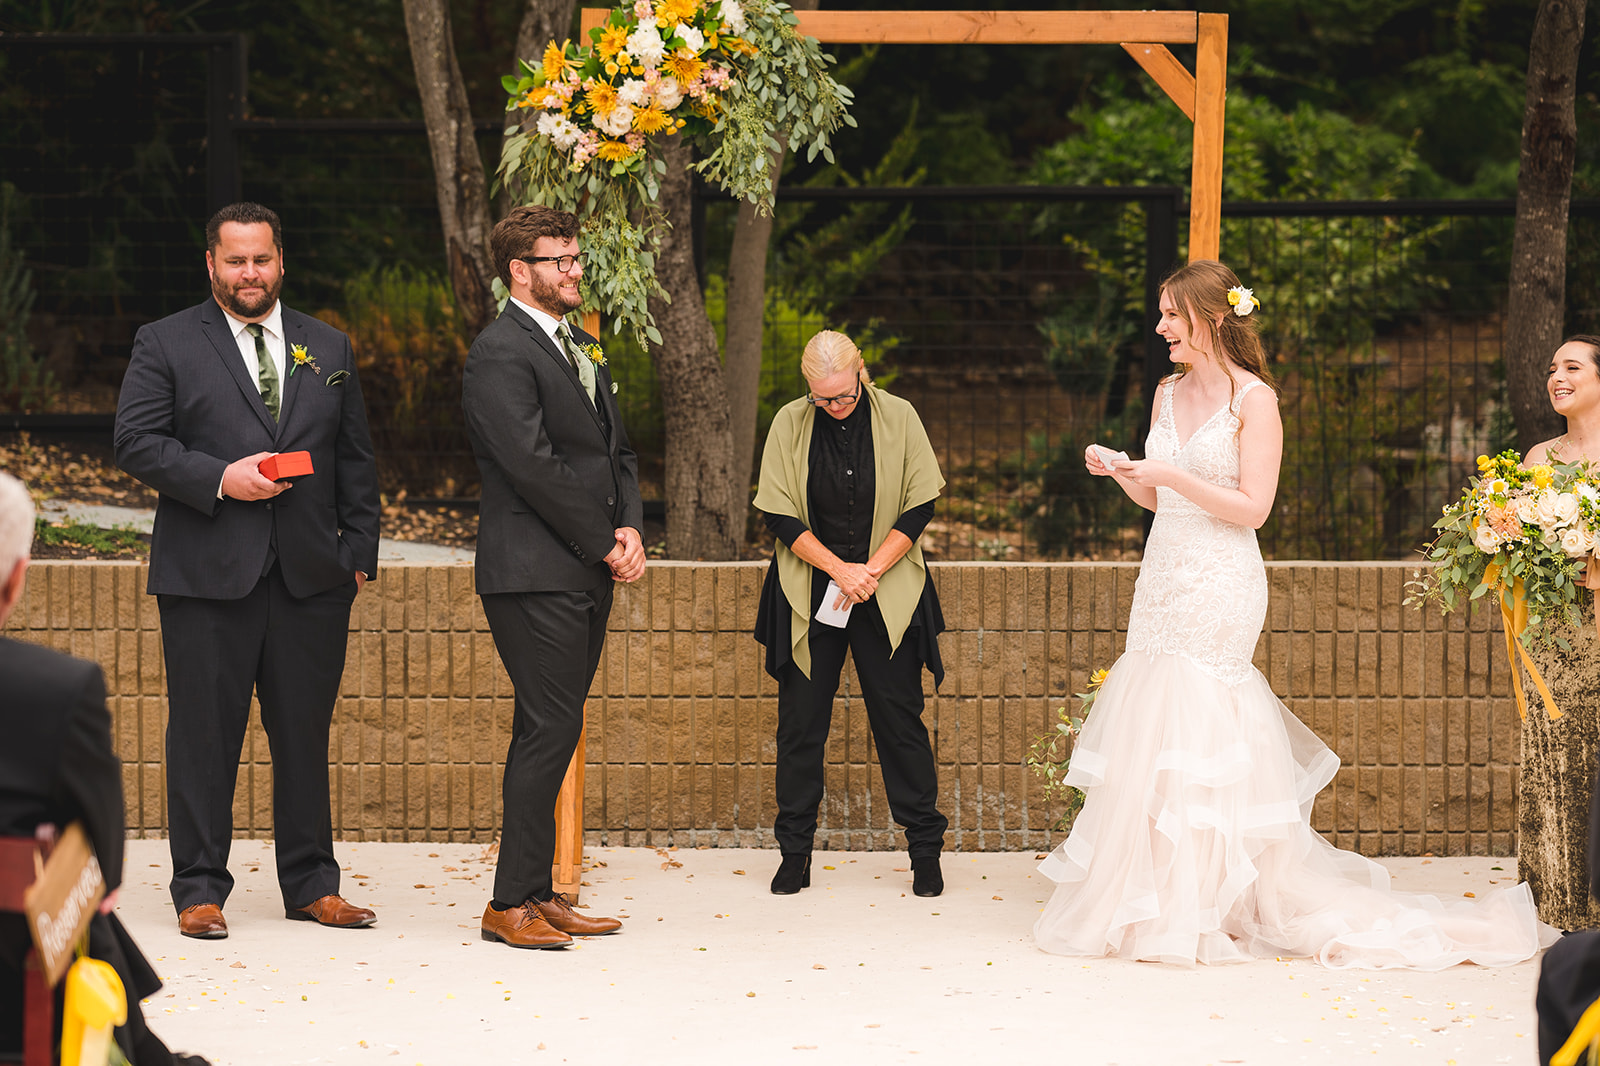 Bride and groom exchanging vows at their intimate Napa Valley wedding ceremony